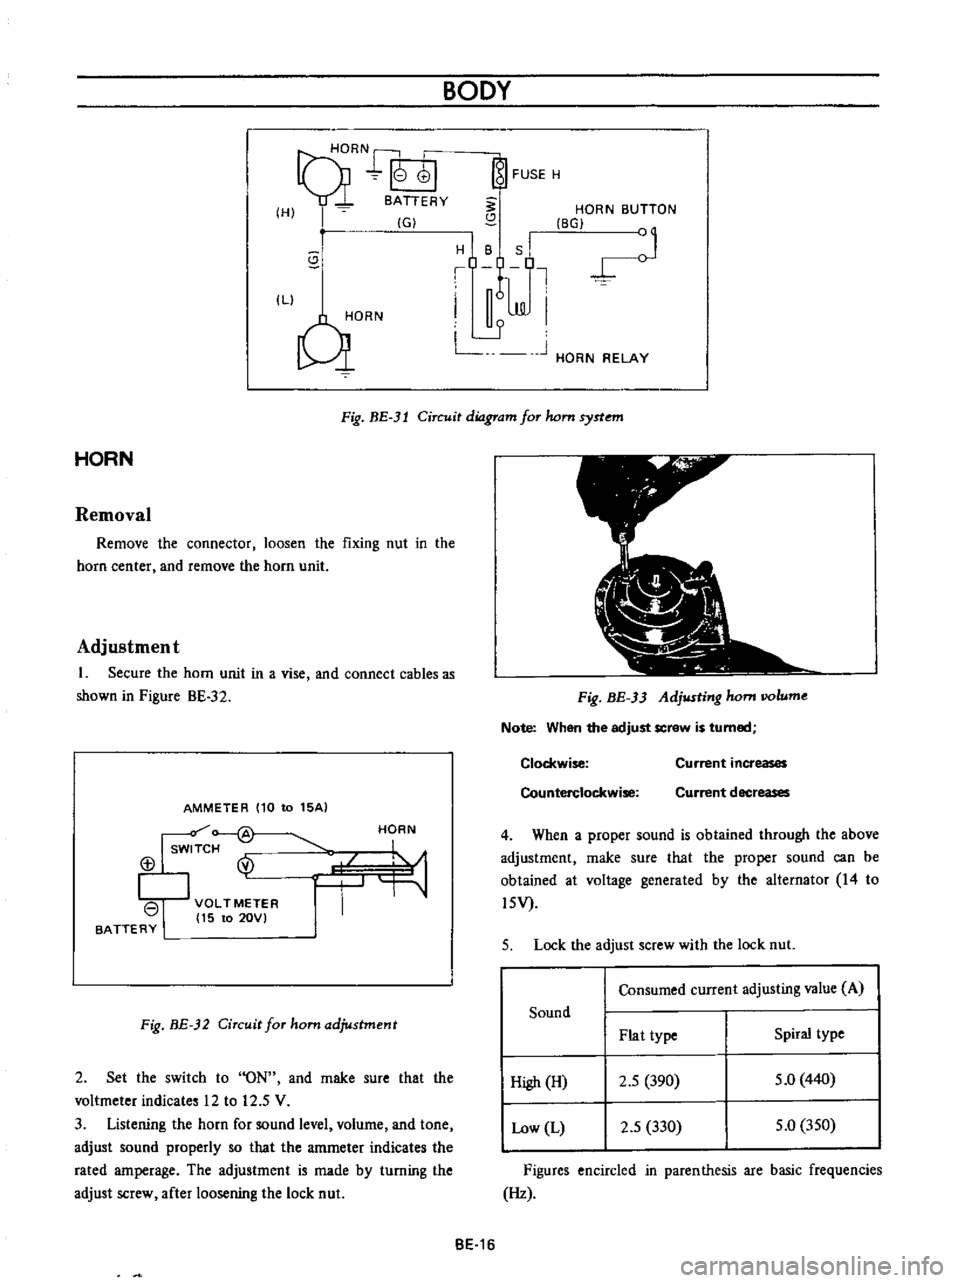 DATSUN B110 1973  Service Repair Manual 
9HORN
r 
I

01

8ATTERY

HI

IGI

s

ILl

C
iORN 
BODY

FUSE 
H

S 
HORN 
BUTTON

BGI

J
H

B 
S

Il

I 
n6lm

I

L 
J 
L

HORN 
RELAY

Fig 
BE 
3l 
Circuit

diagram 
for 
hom

syrtem

HORN

Removal
